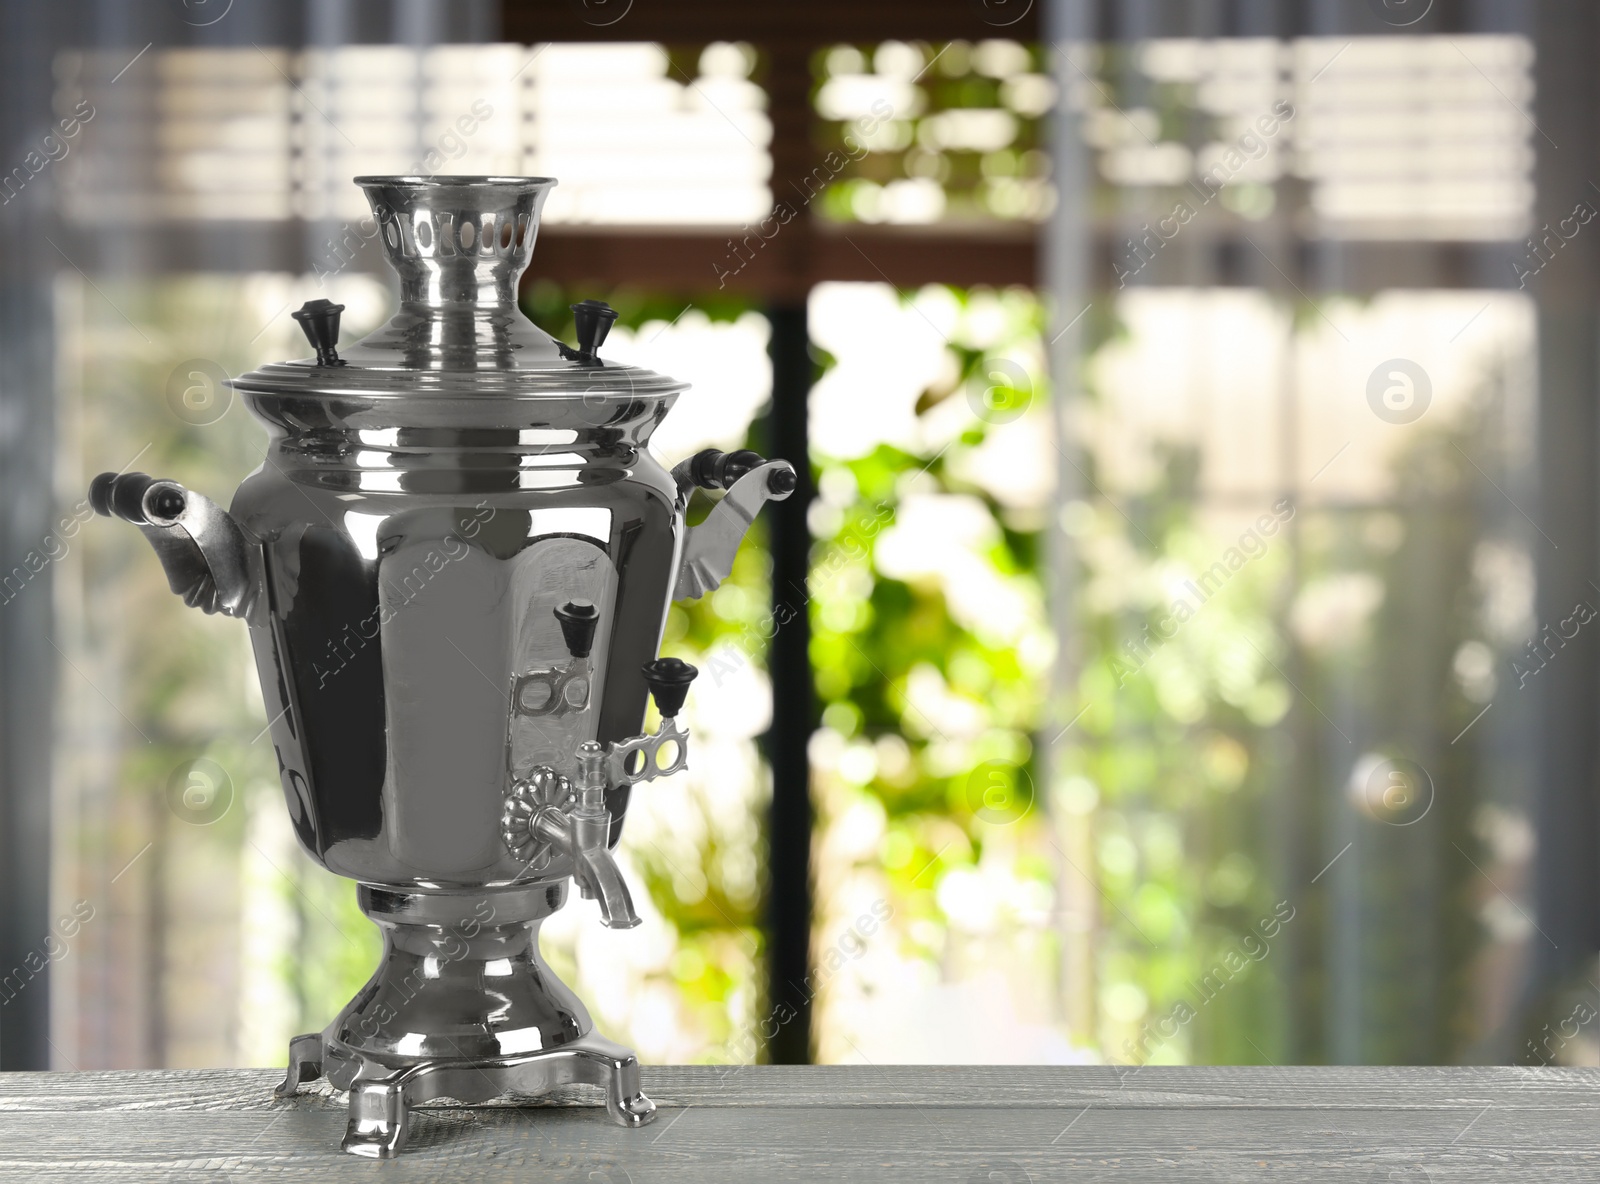 Image of Traditional Russian samovar on wooden table against window in room. Space for text